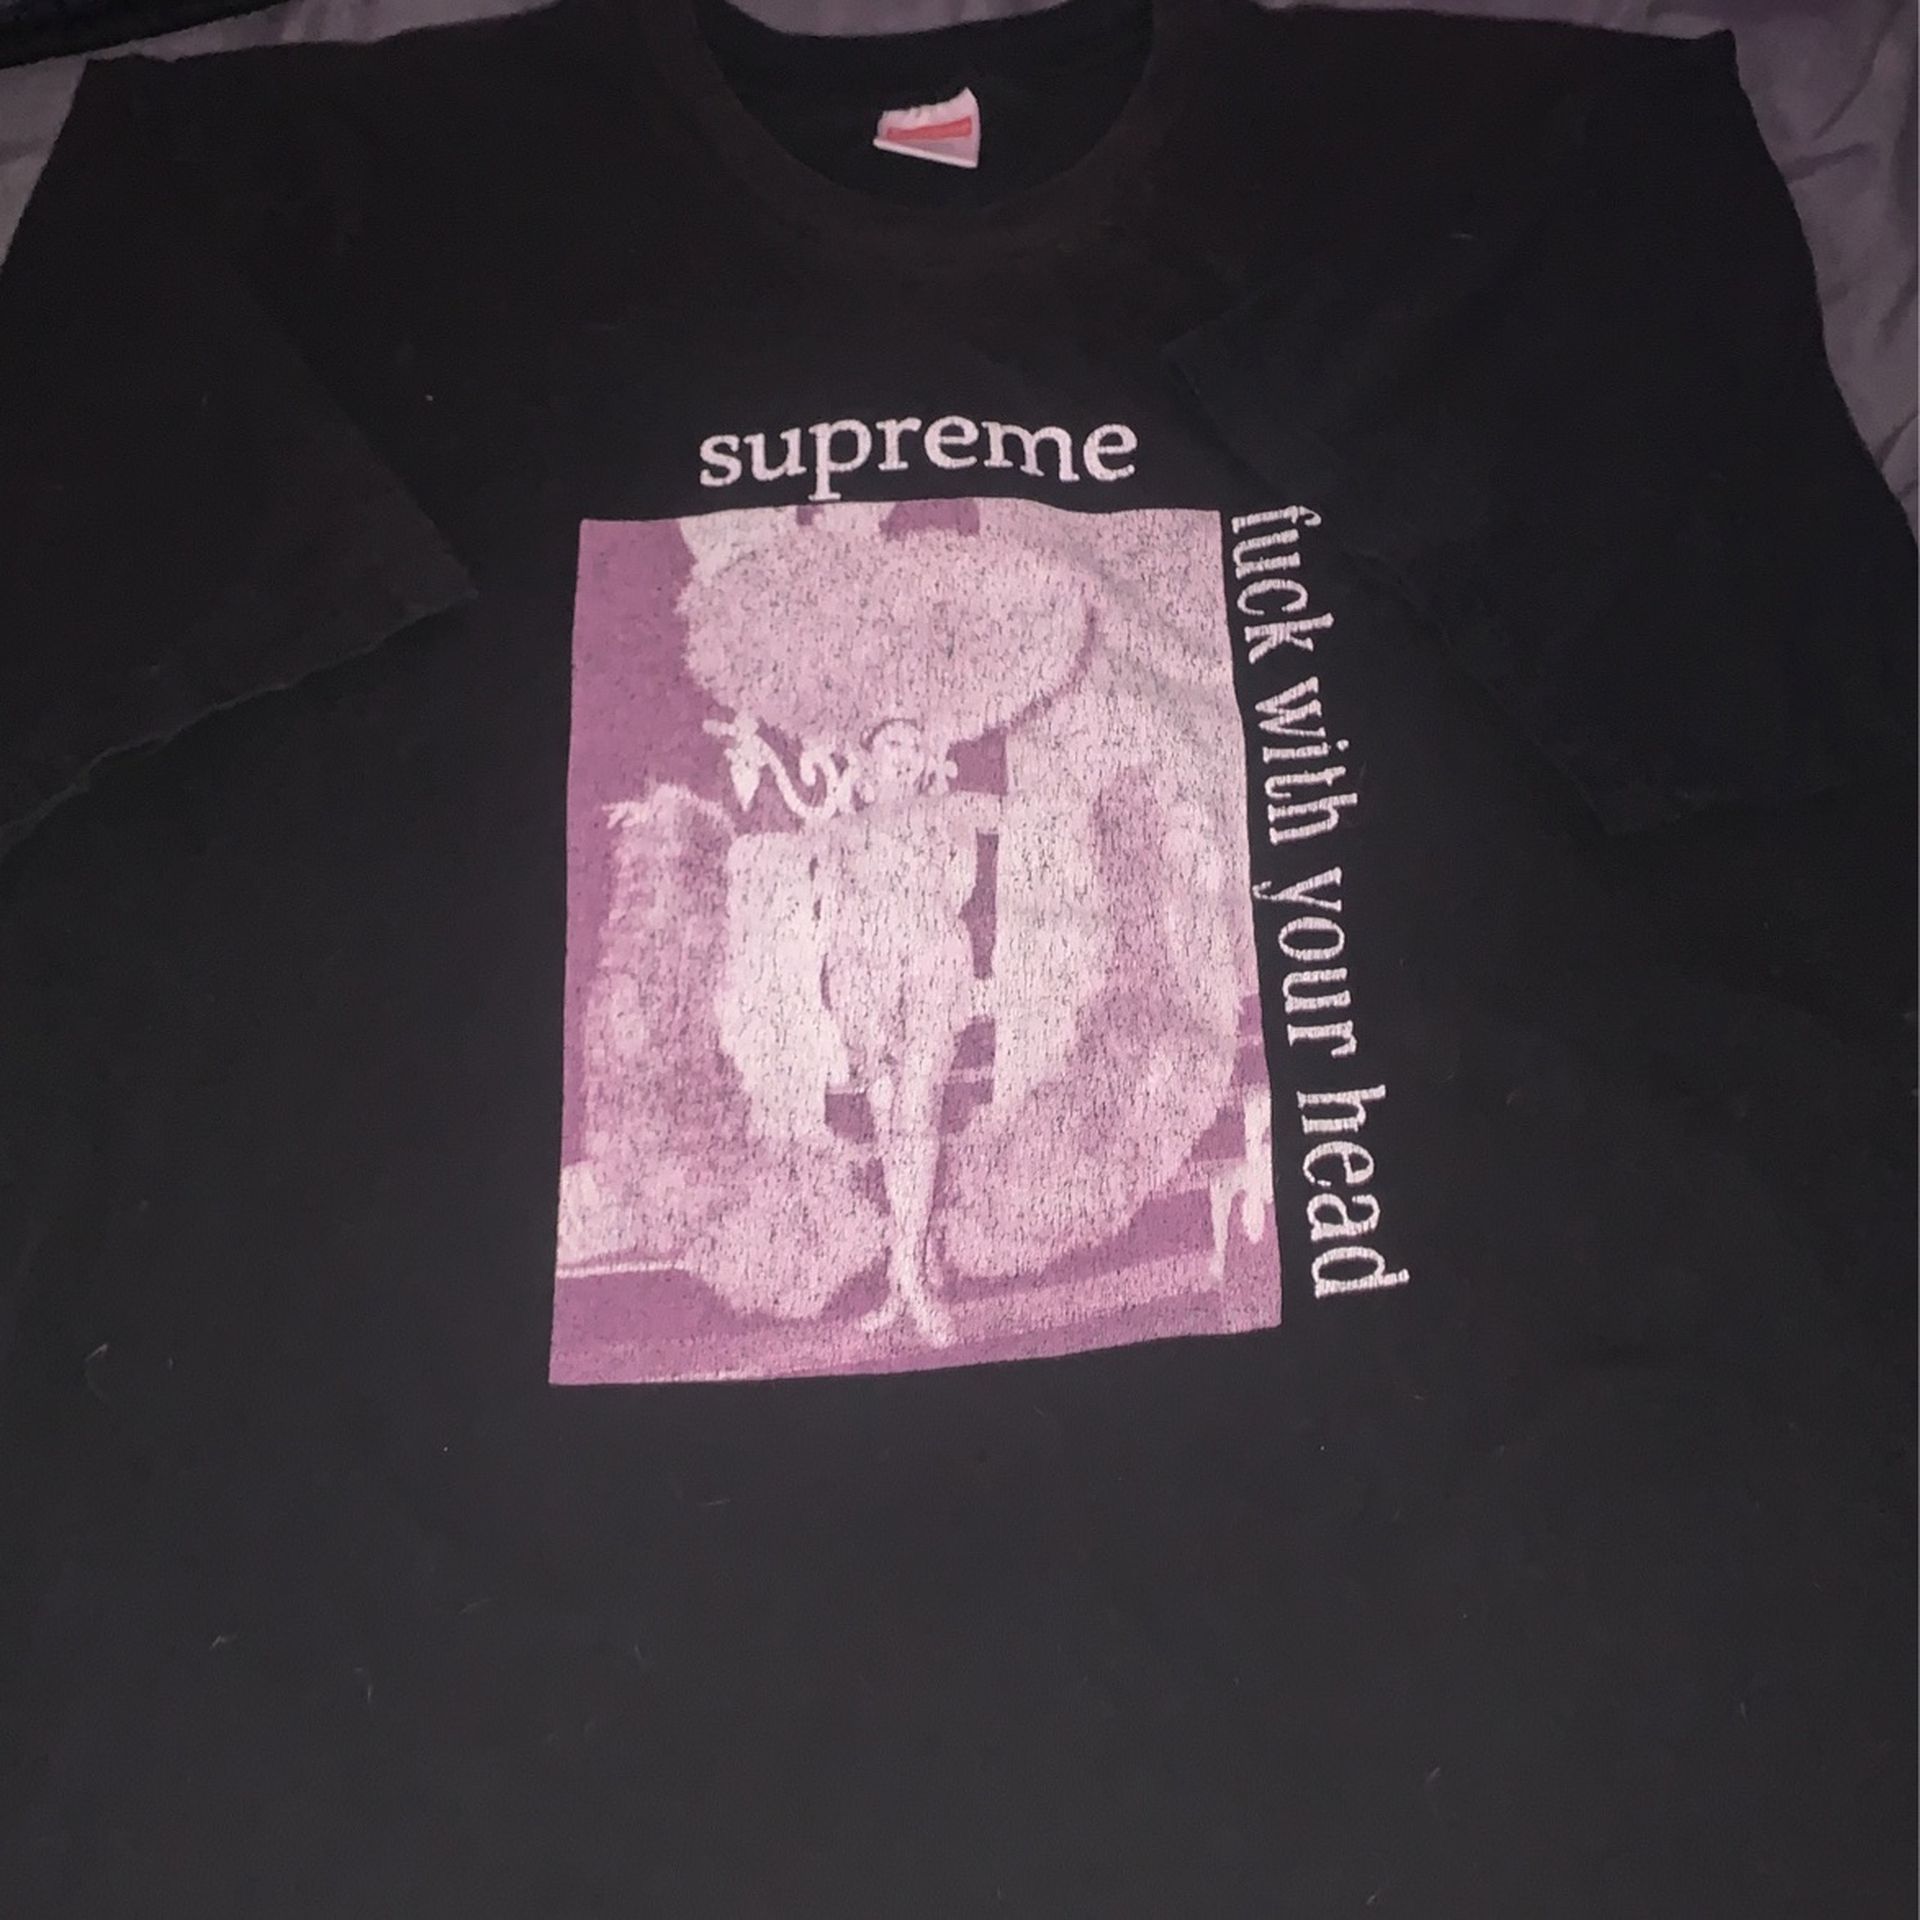 Supreme Tee “Fuck with your head”